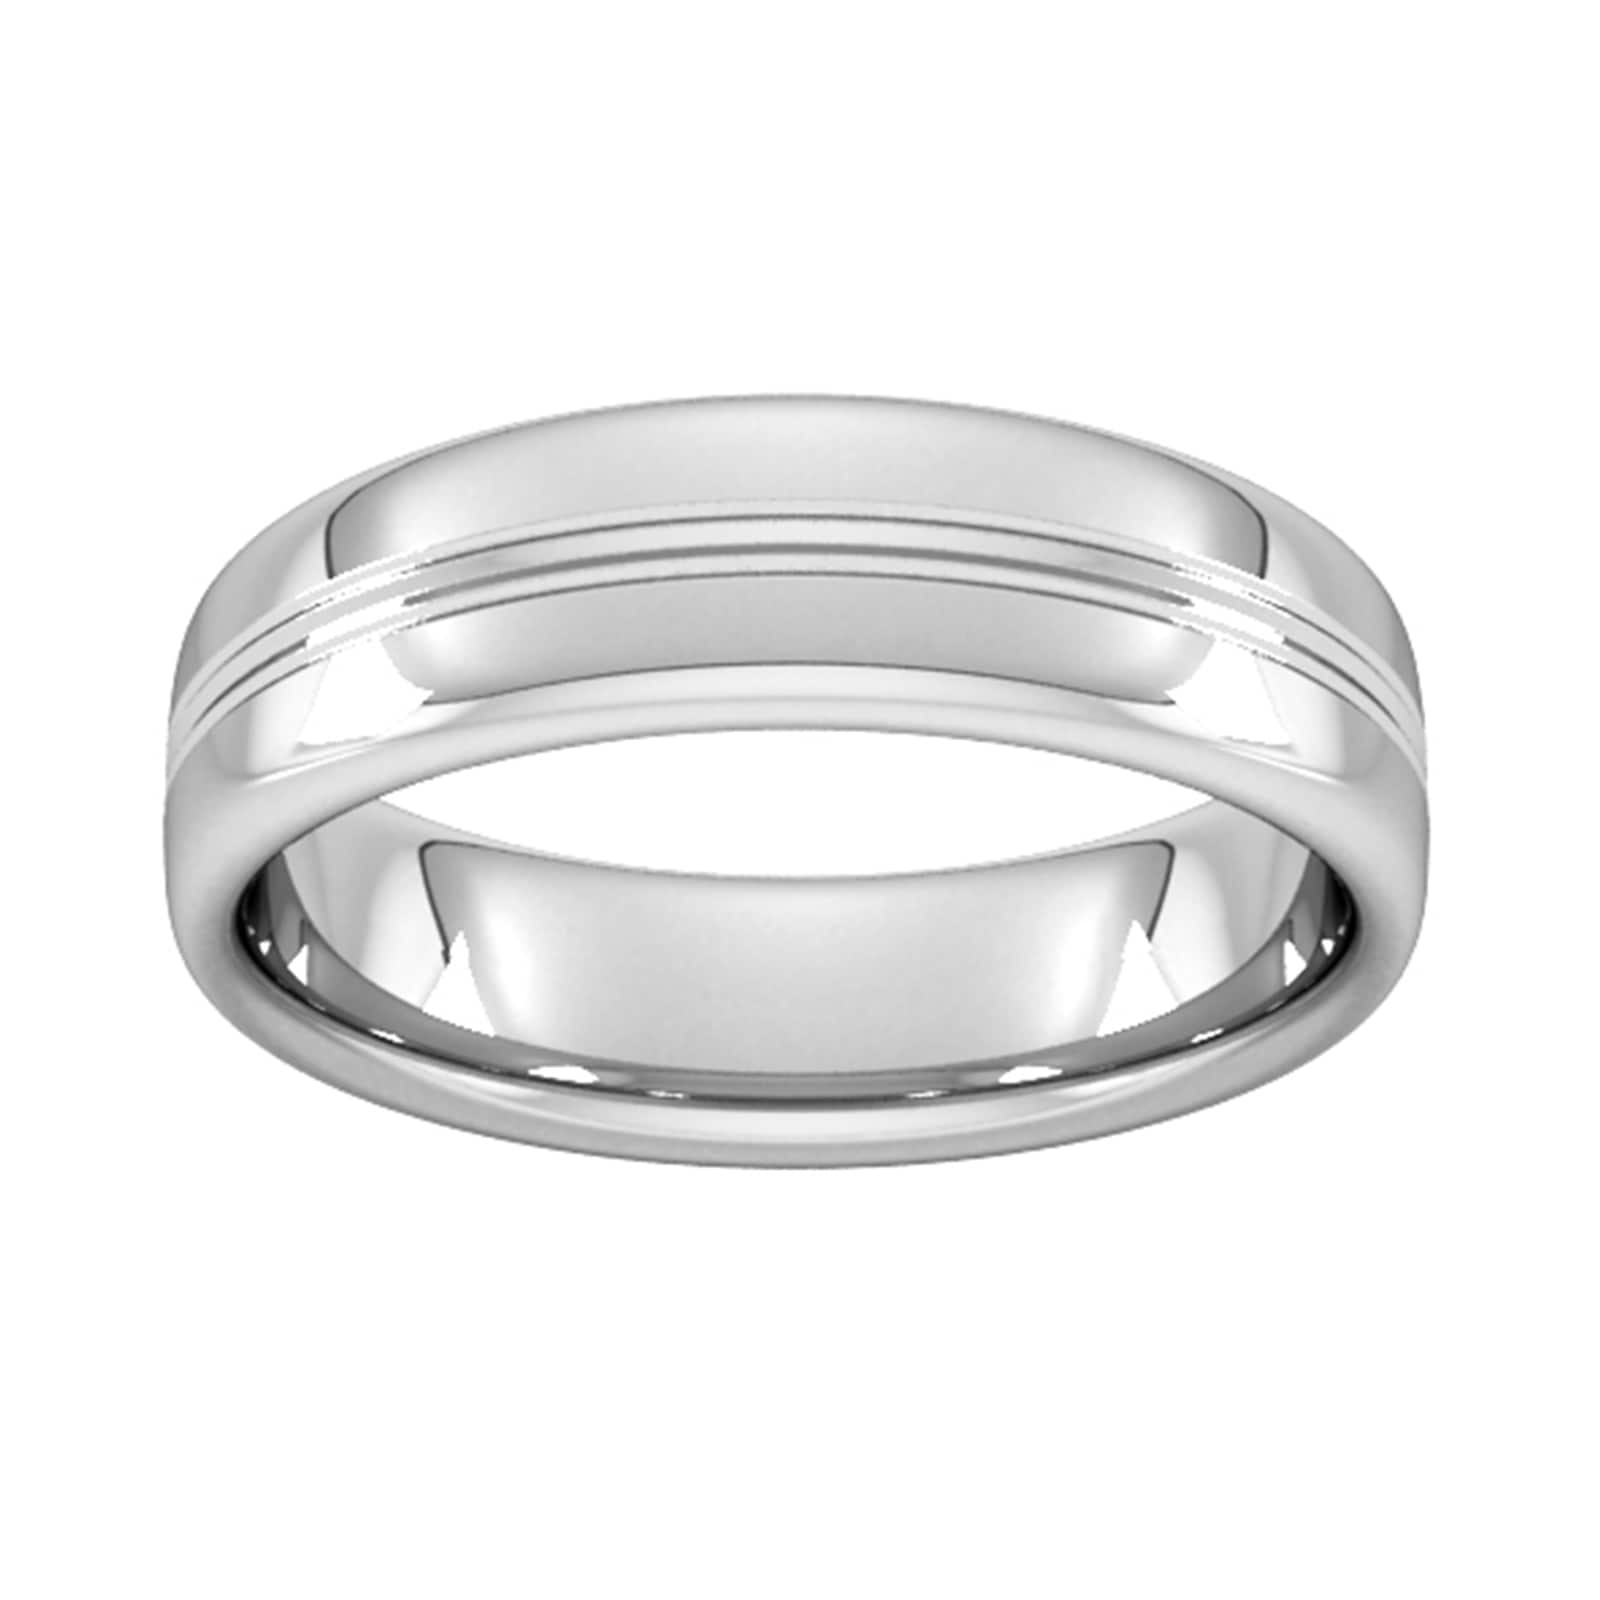 6mm Slight Court Extra Heavy Grooved Polished Finish Wedding Ring In 18 Carat White Gold - Ring Size N